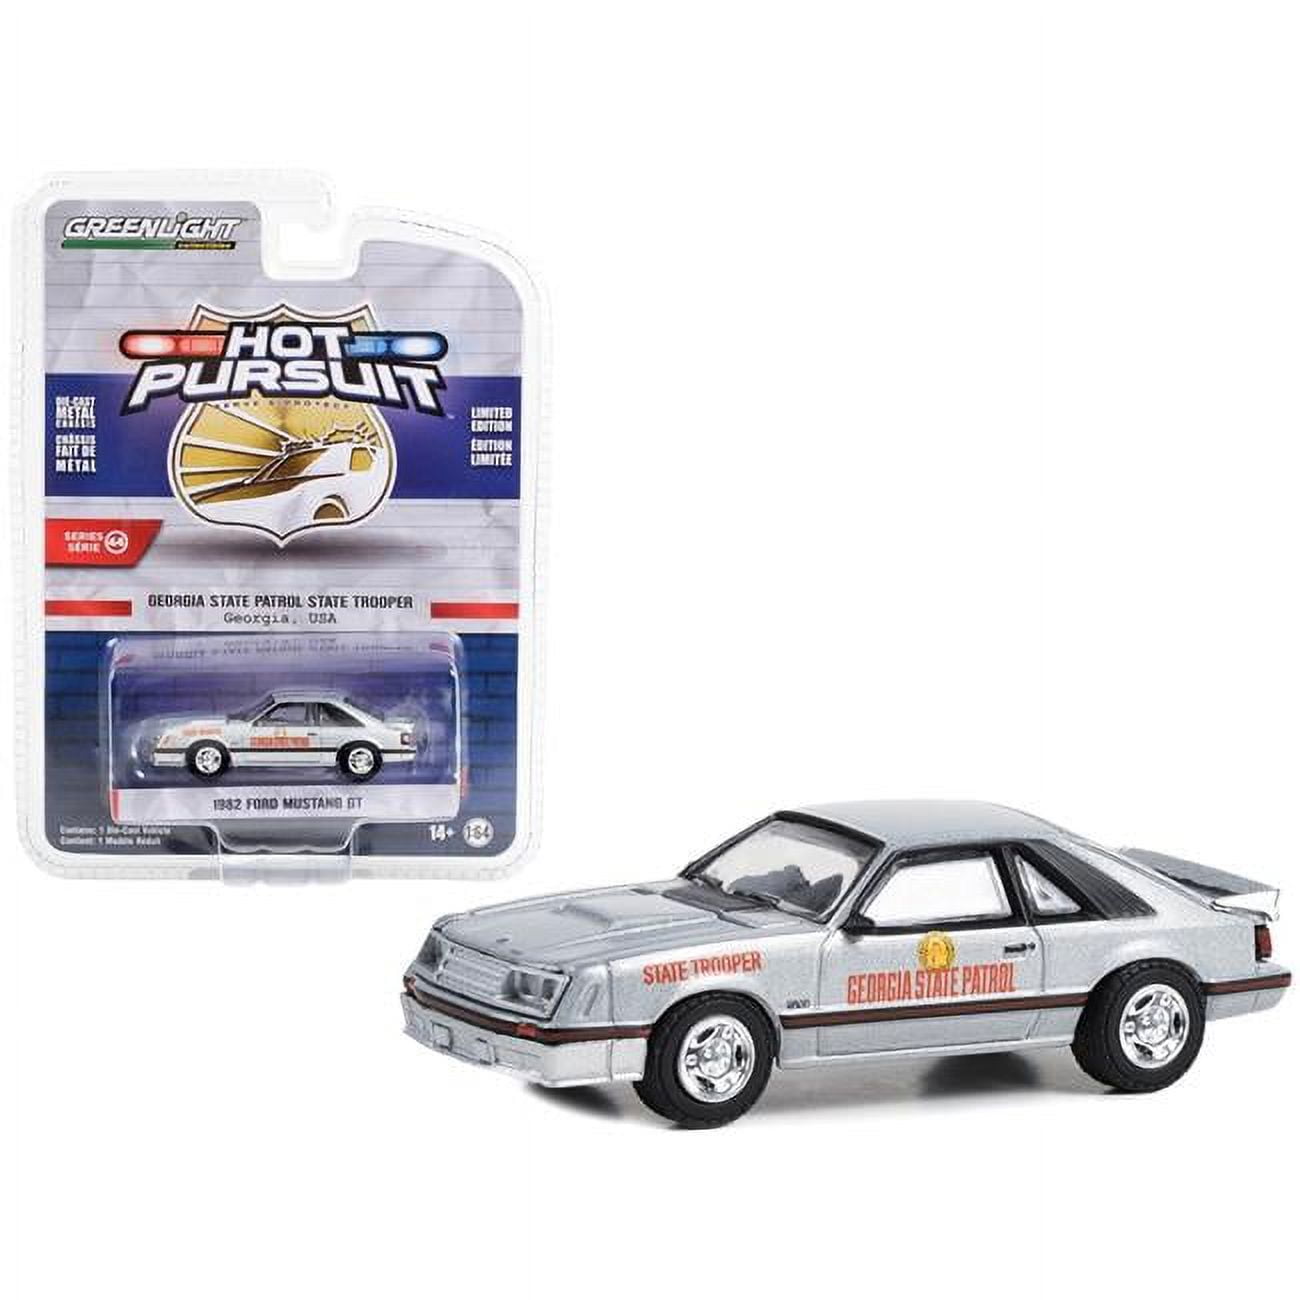 43020A 1 to 64 Scale 1982 Ford Mustang GT Silver Metallic Georgia State Patrol State Trooper Hot Pursuit Series 44 Diecast Model Car -  GreenLight